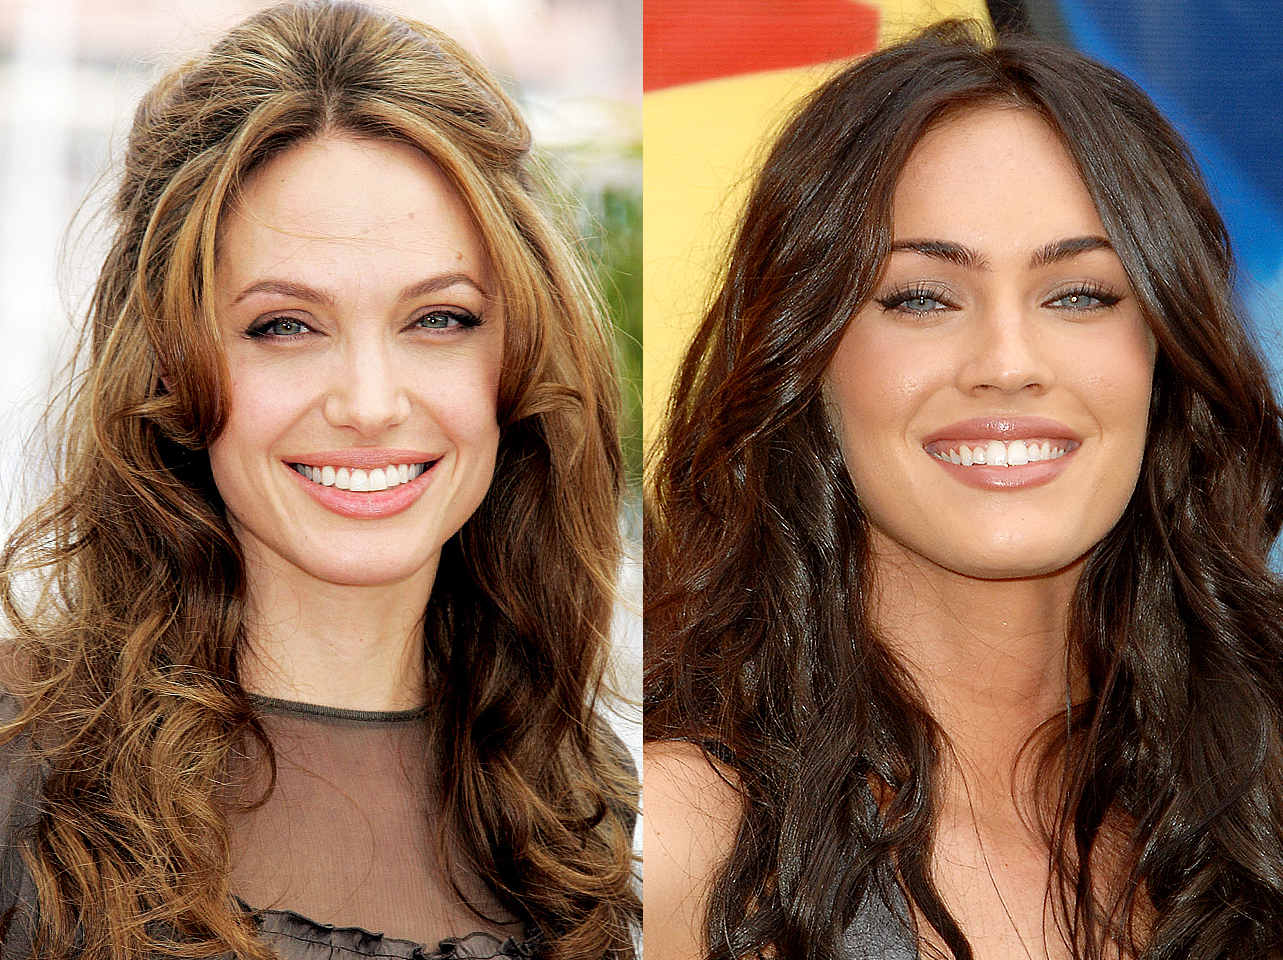 Angelina Jolie and Megan Fox | Source: Getty Images